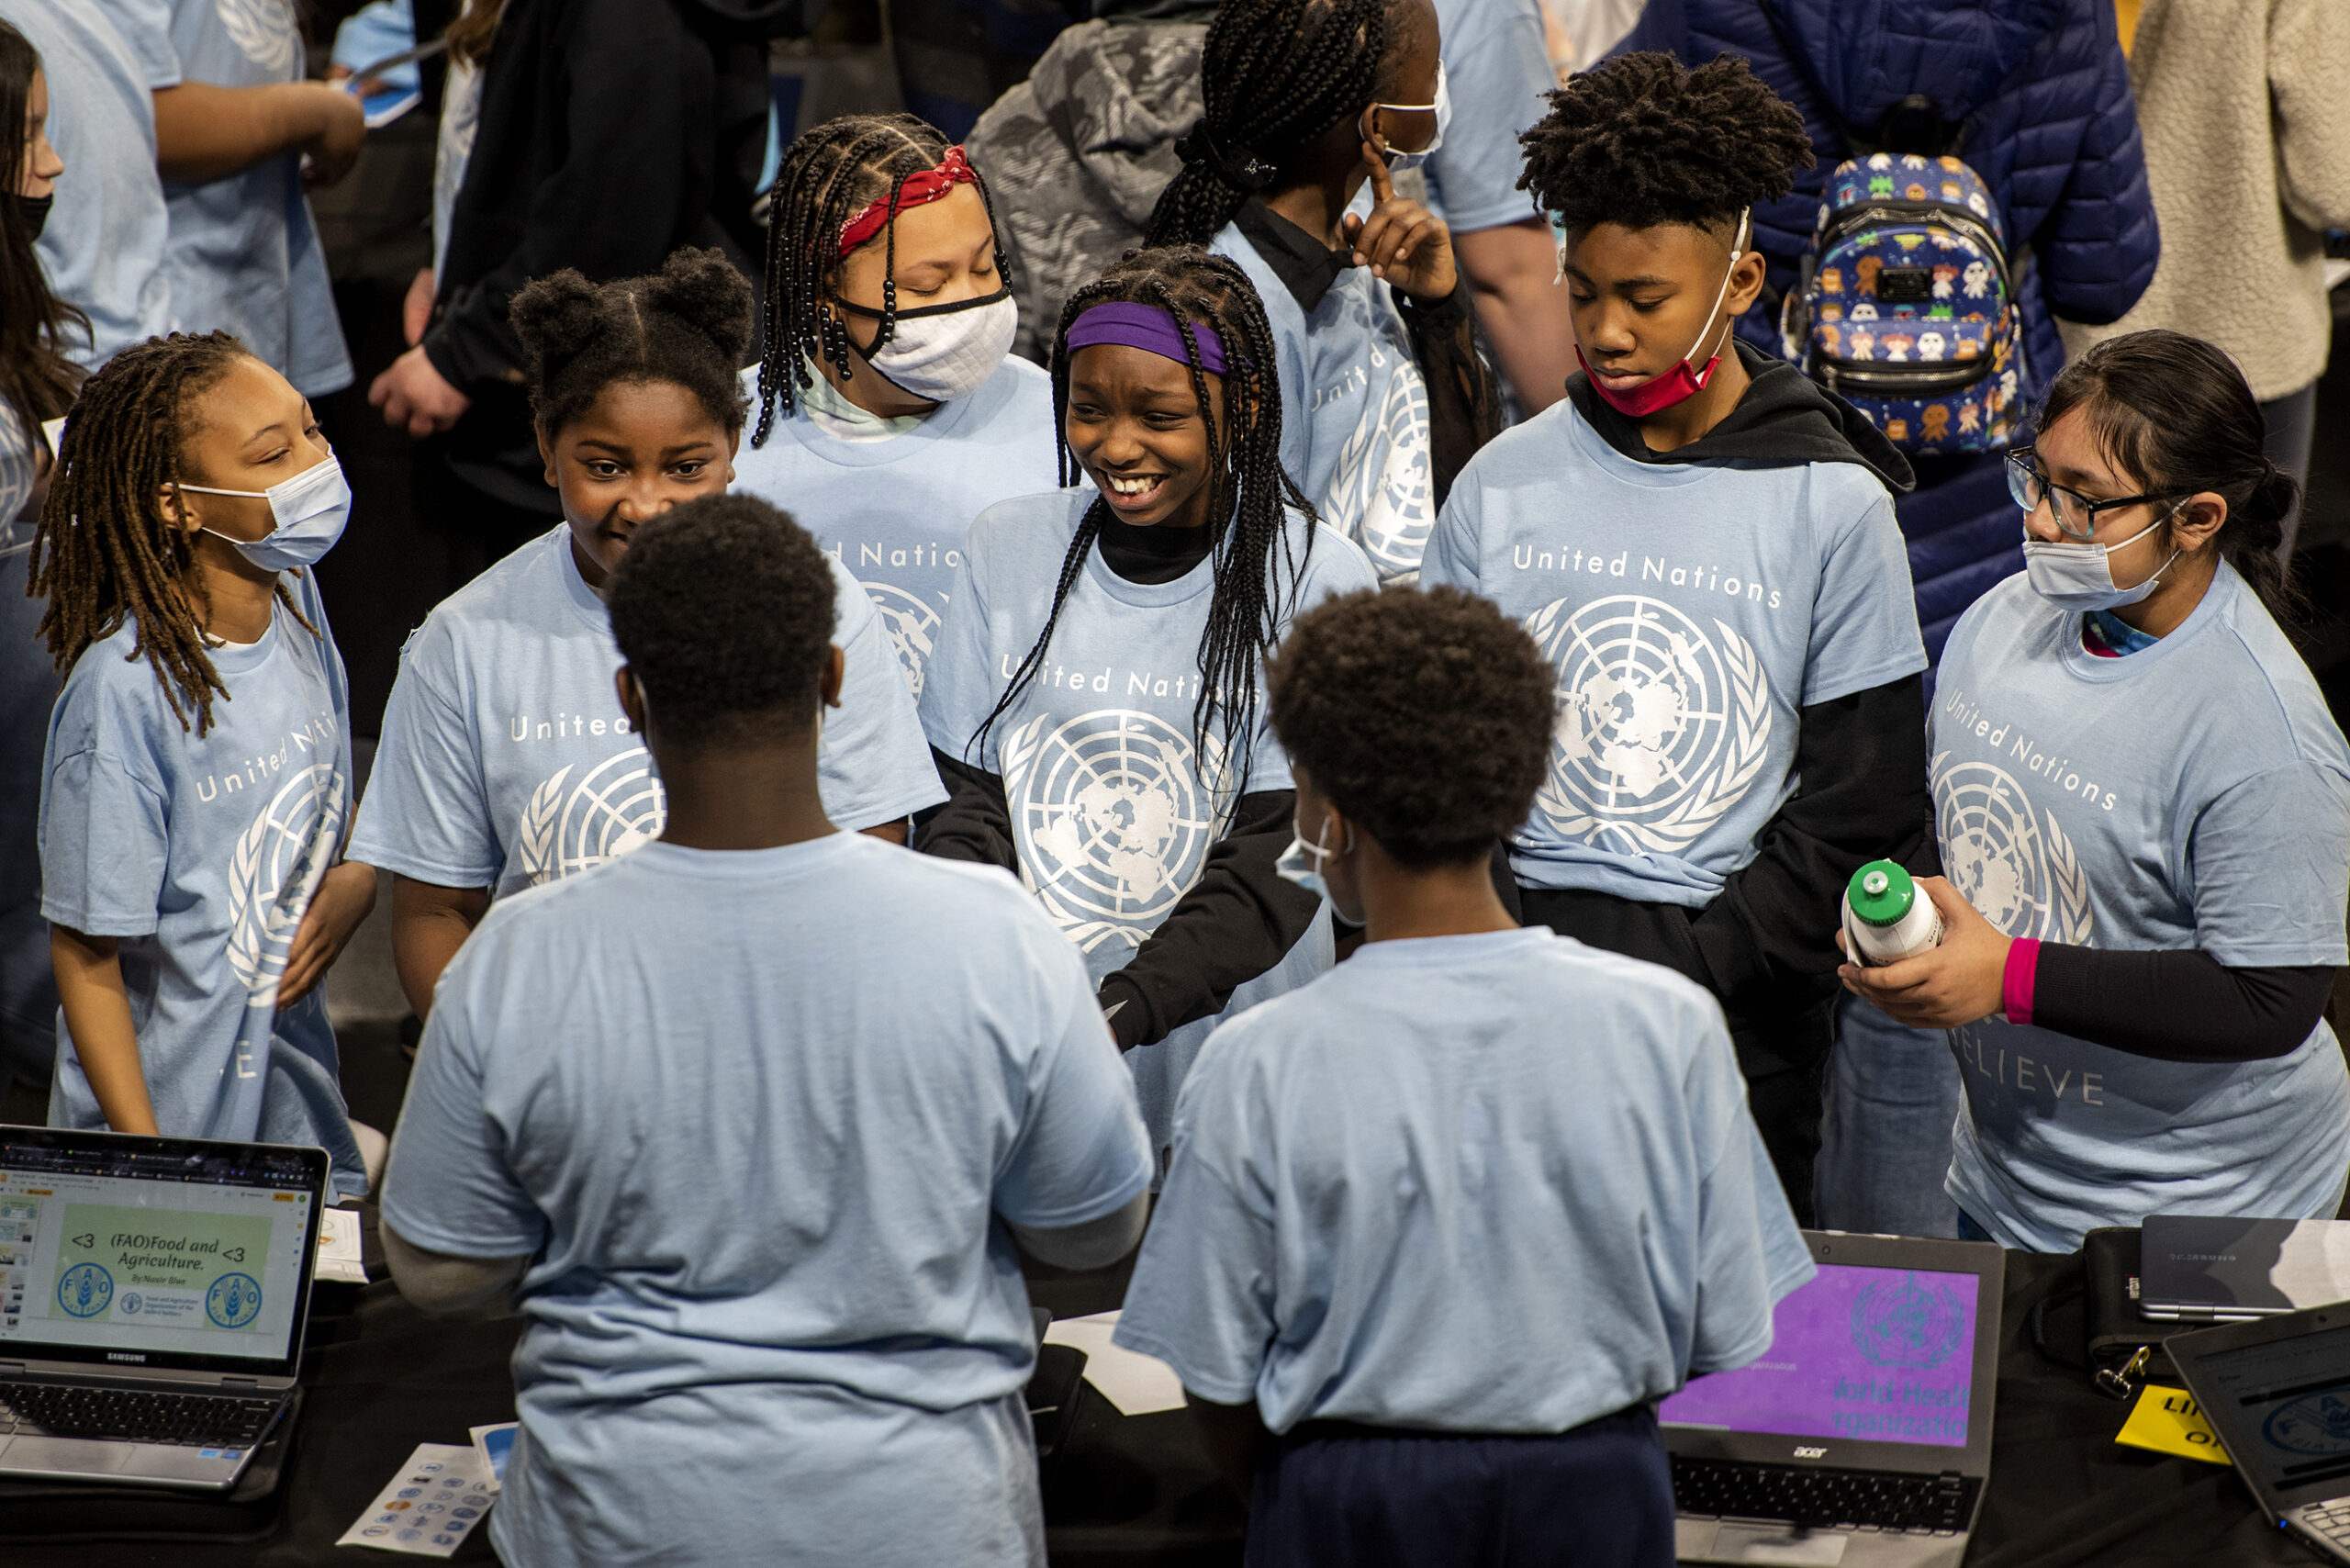 Students in matching t-shirts gather around a table to hear a presentation.